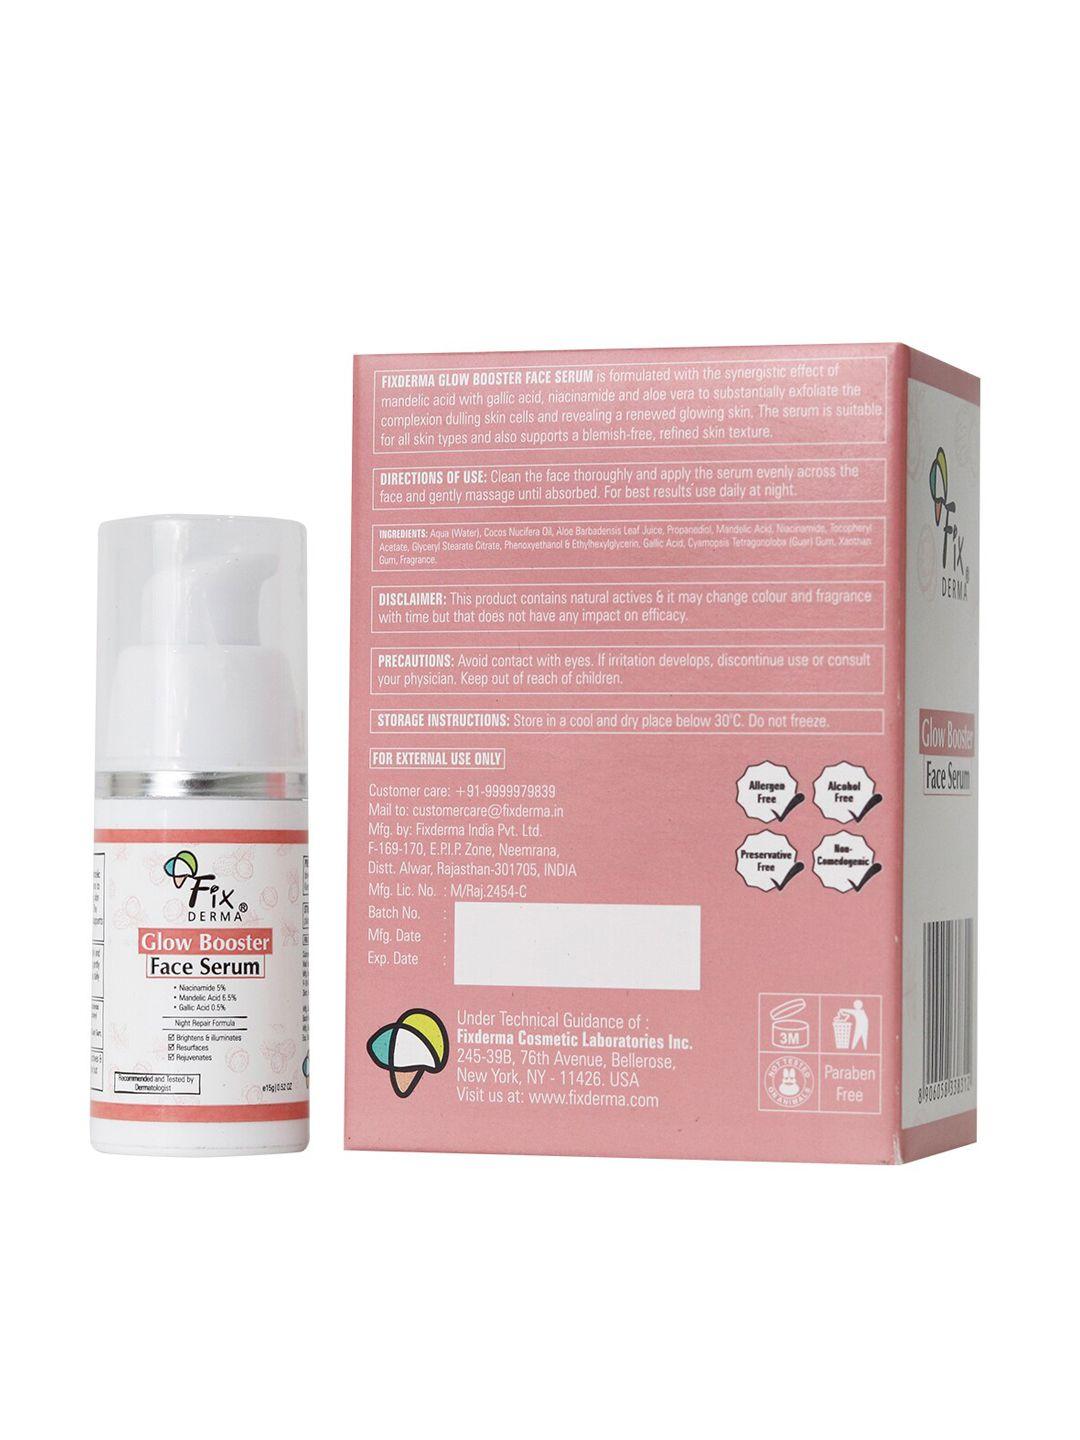 fixderma glow booster face serum with 5% niacinamide - 15 g